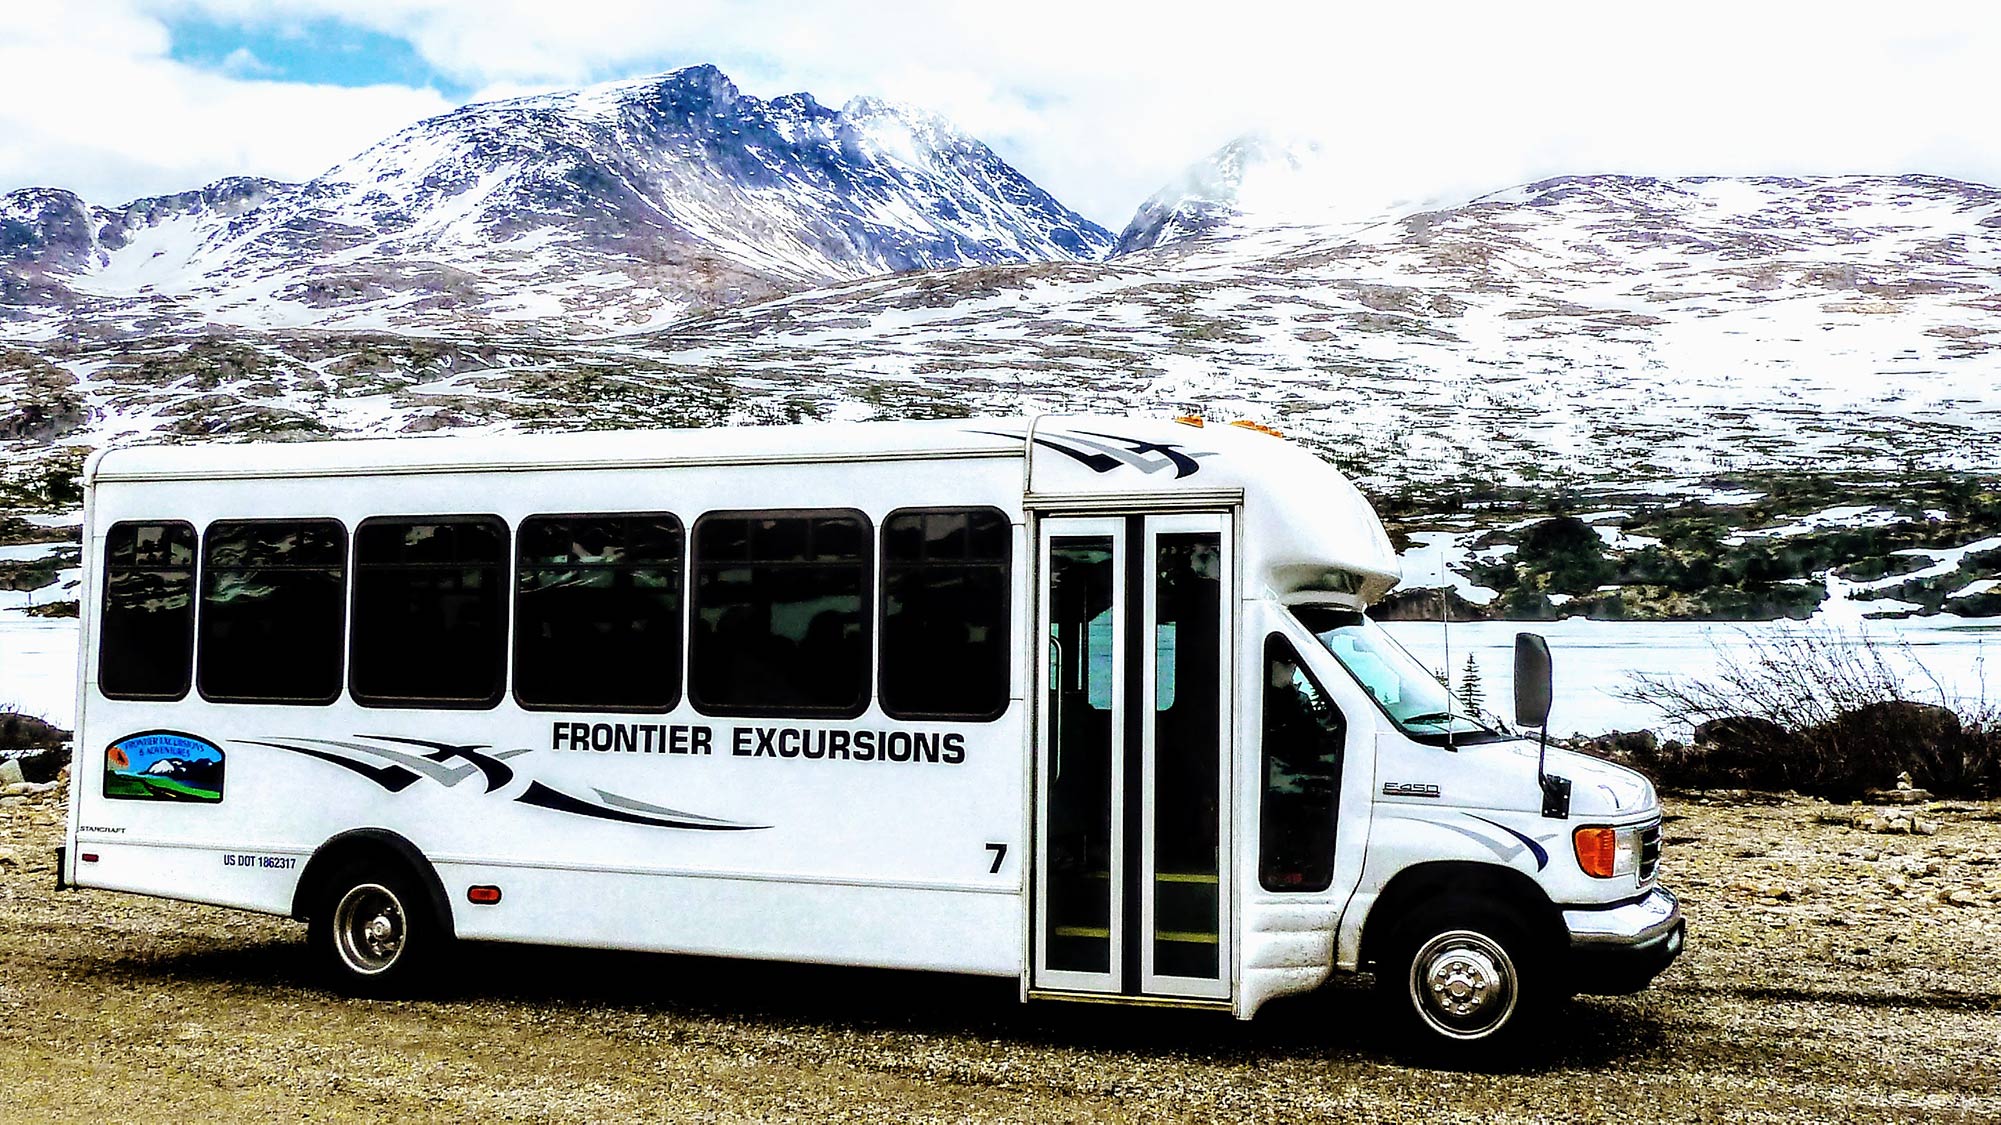 Frontier bus at White Pass Summit